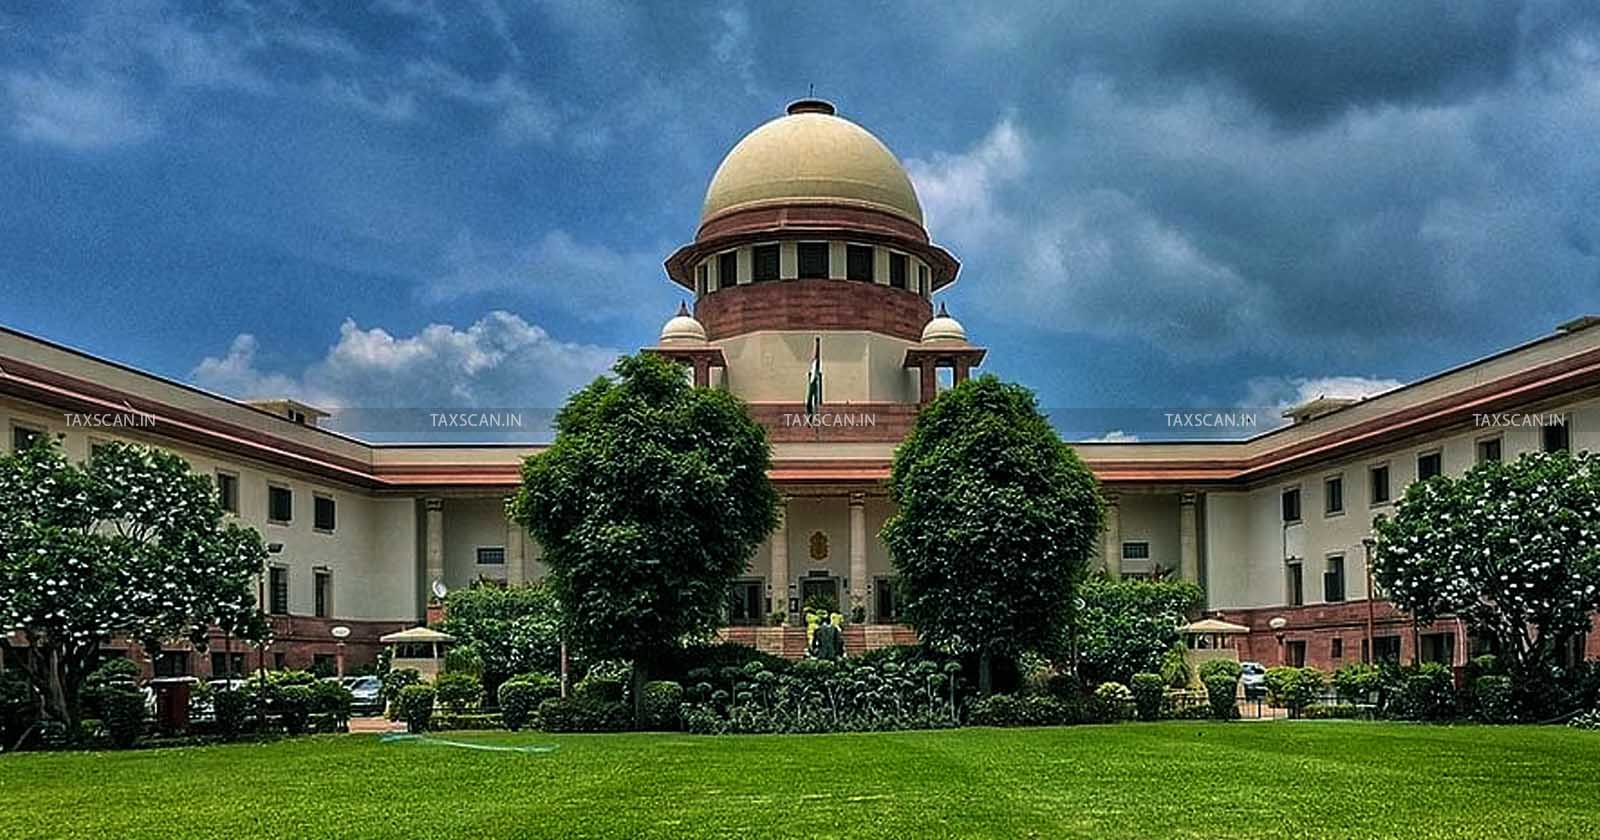 Breach of Law in All Cases - Public Disorder - Supreme Court on Test of Legality of Preventive Detention - TAXSCAN